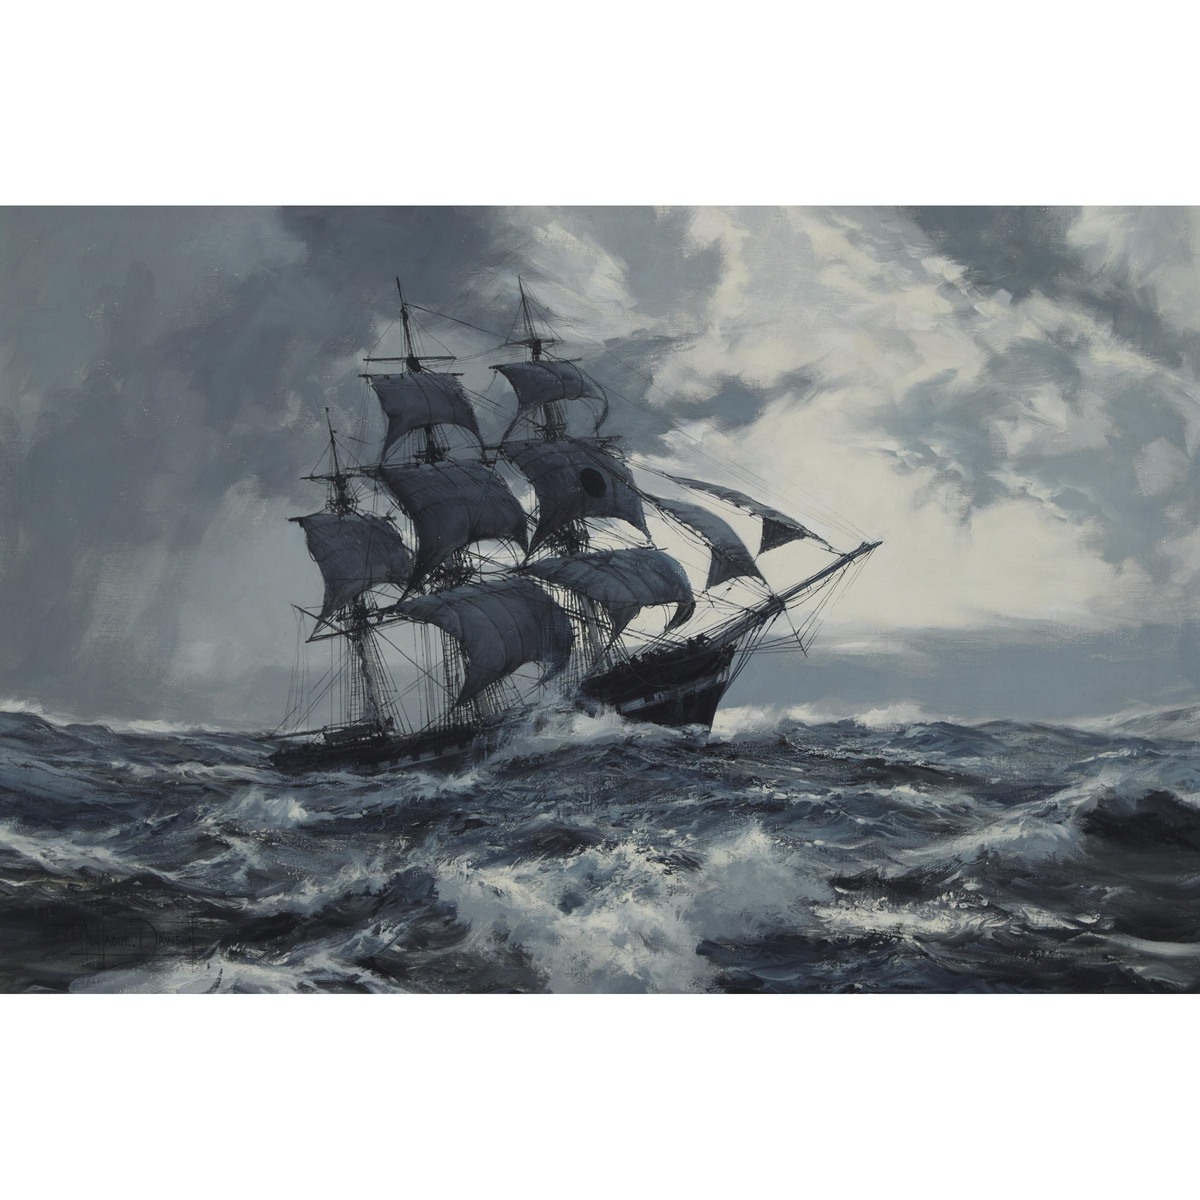 Montague Dawson (1895-1973), THE ALBION, signed lower left, 19 x 29.5 in — 48.3 x 74.9 cm